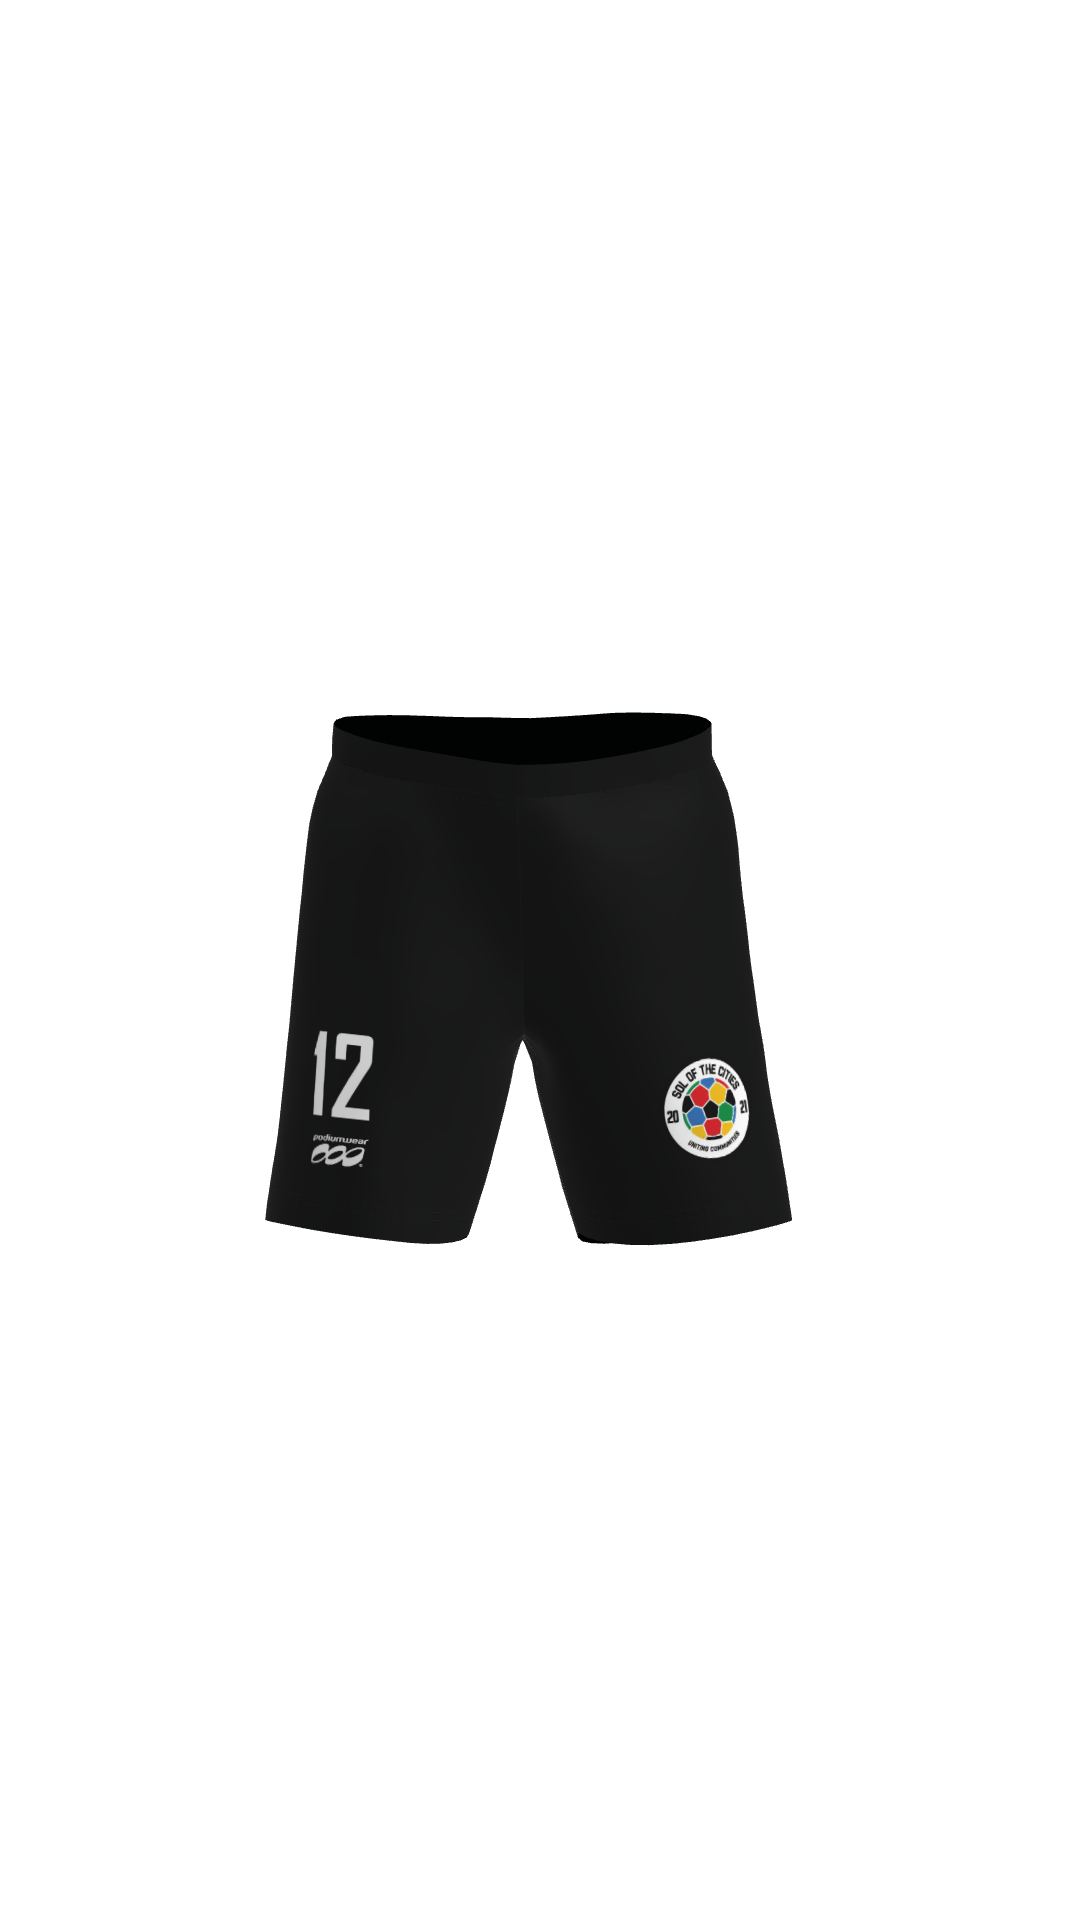 Custom Youth Soccer Shorts, Designed For Your Kids' Club